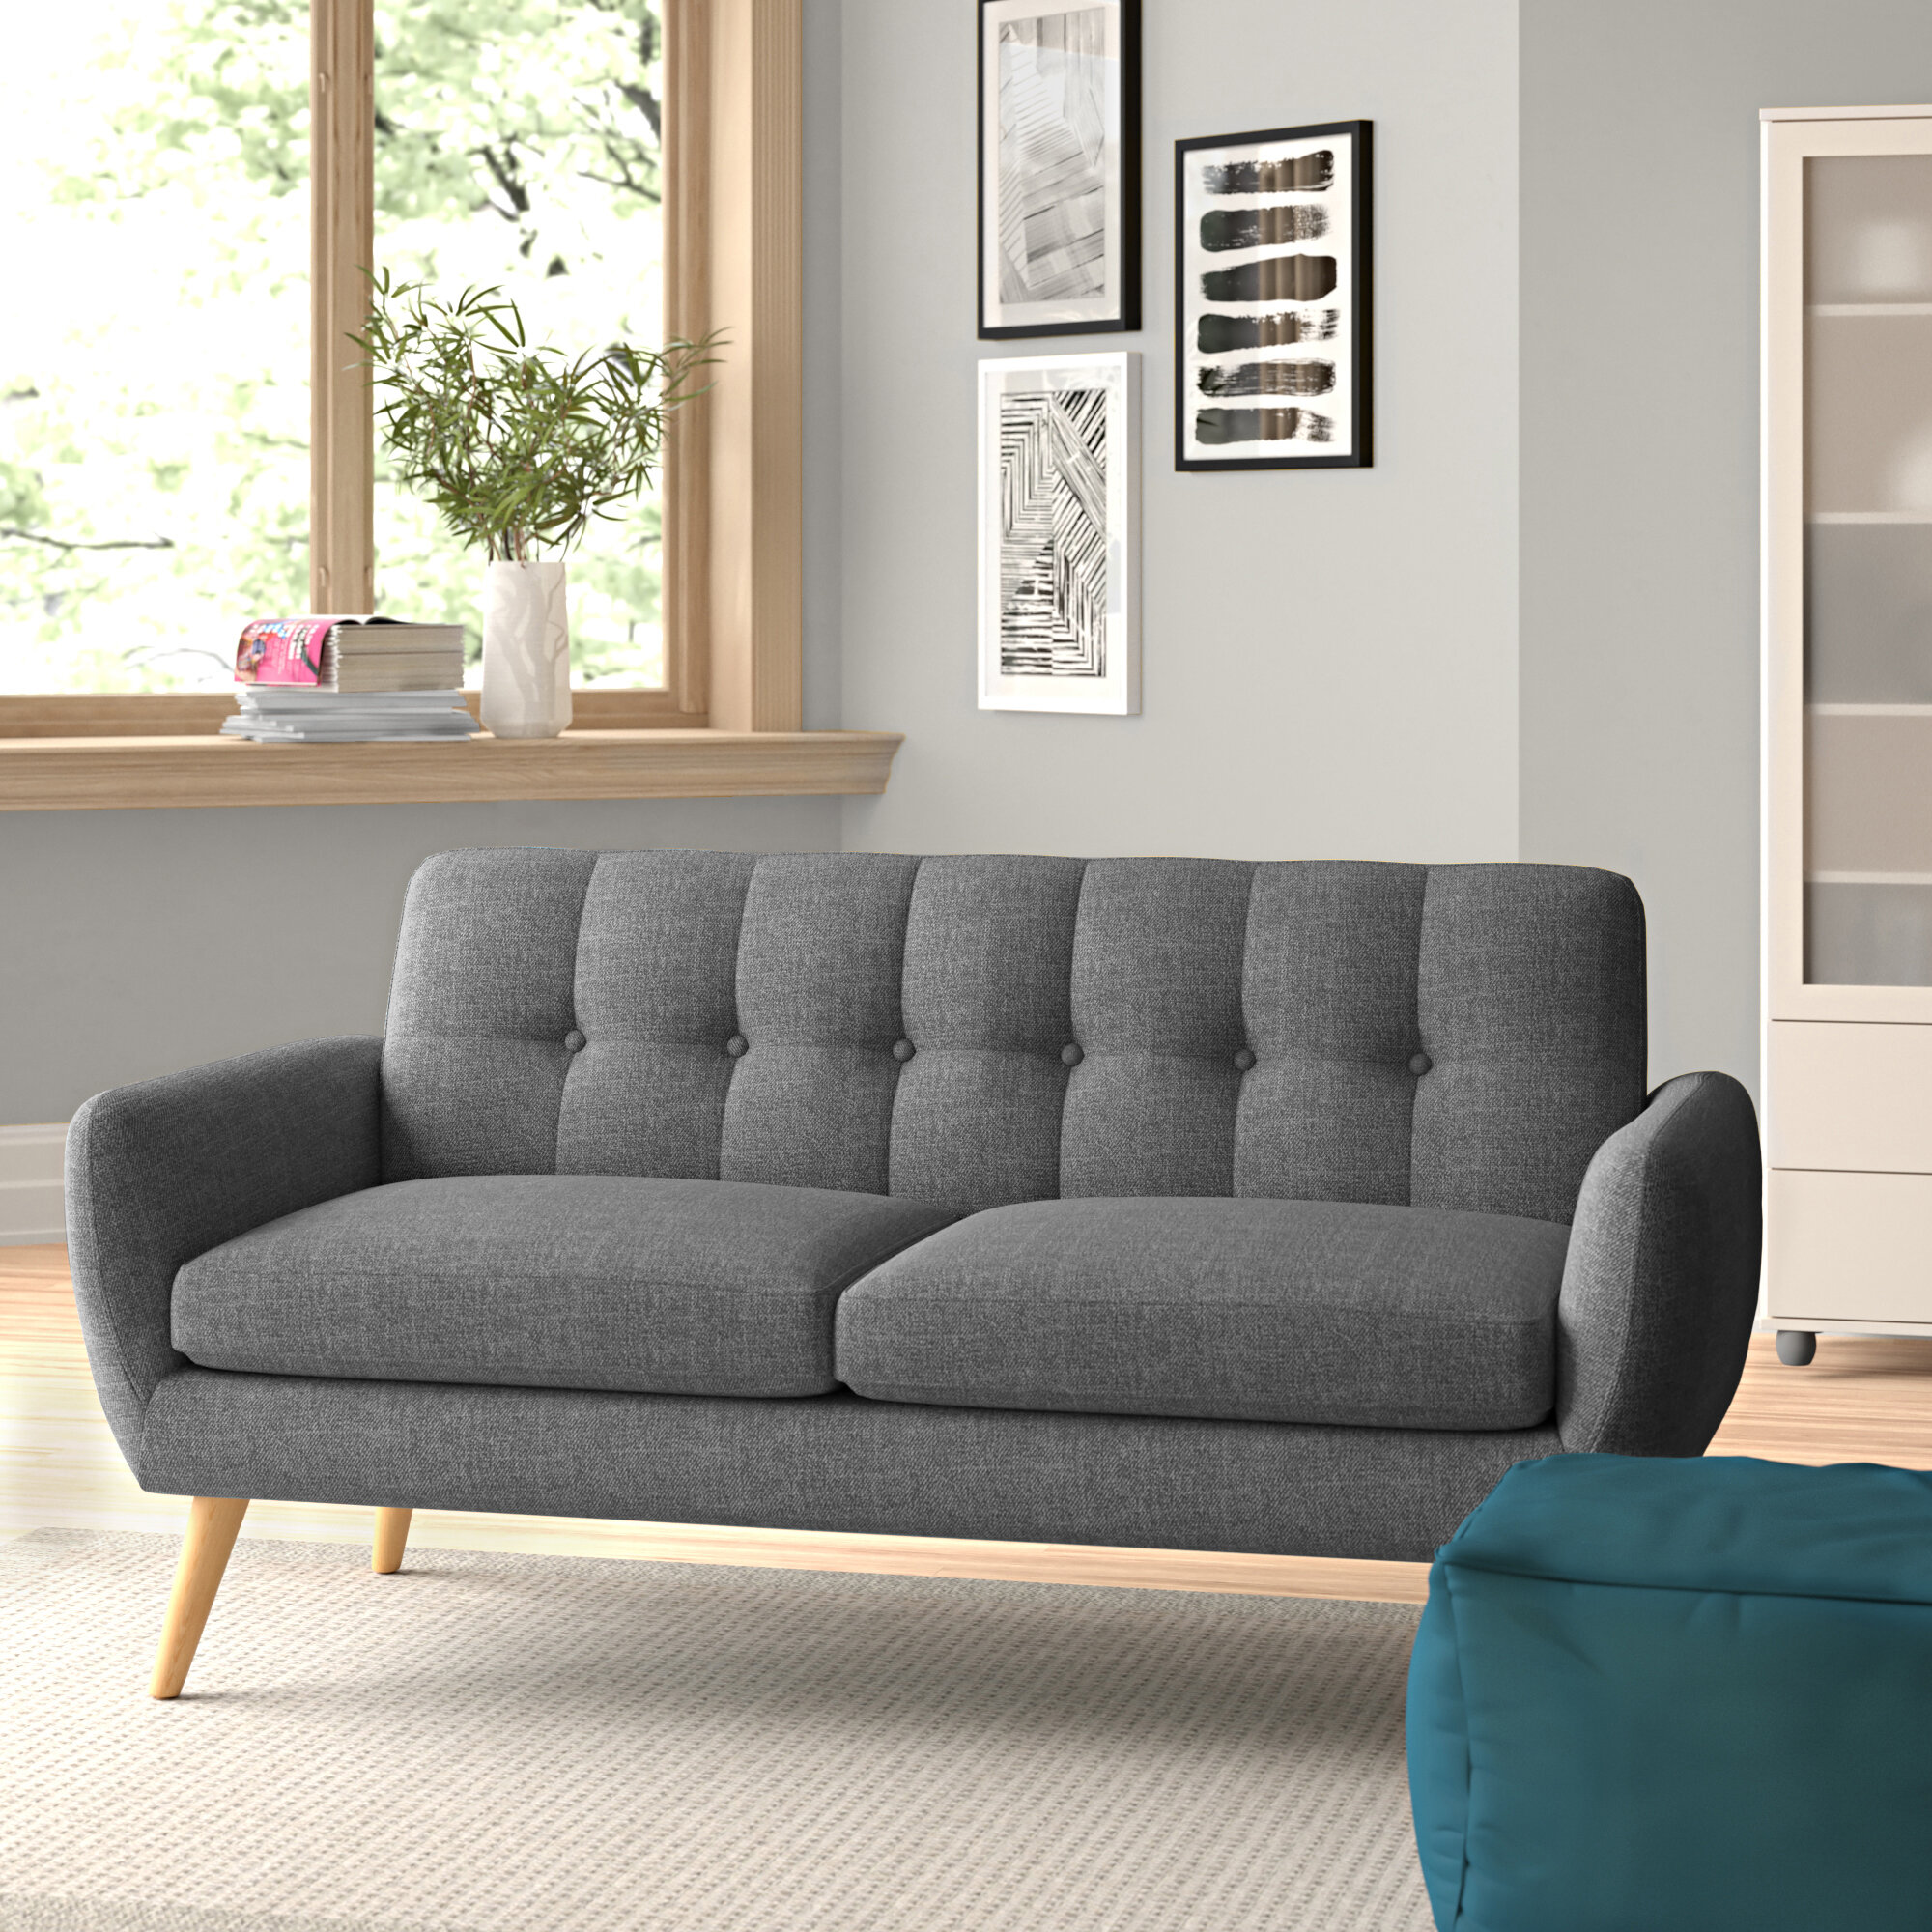 Soft 2-Seater Sofa Light Gray 3-Seater Sofabed Home Office Comfortable Couch 